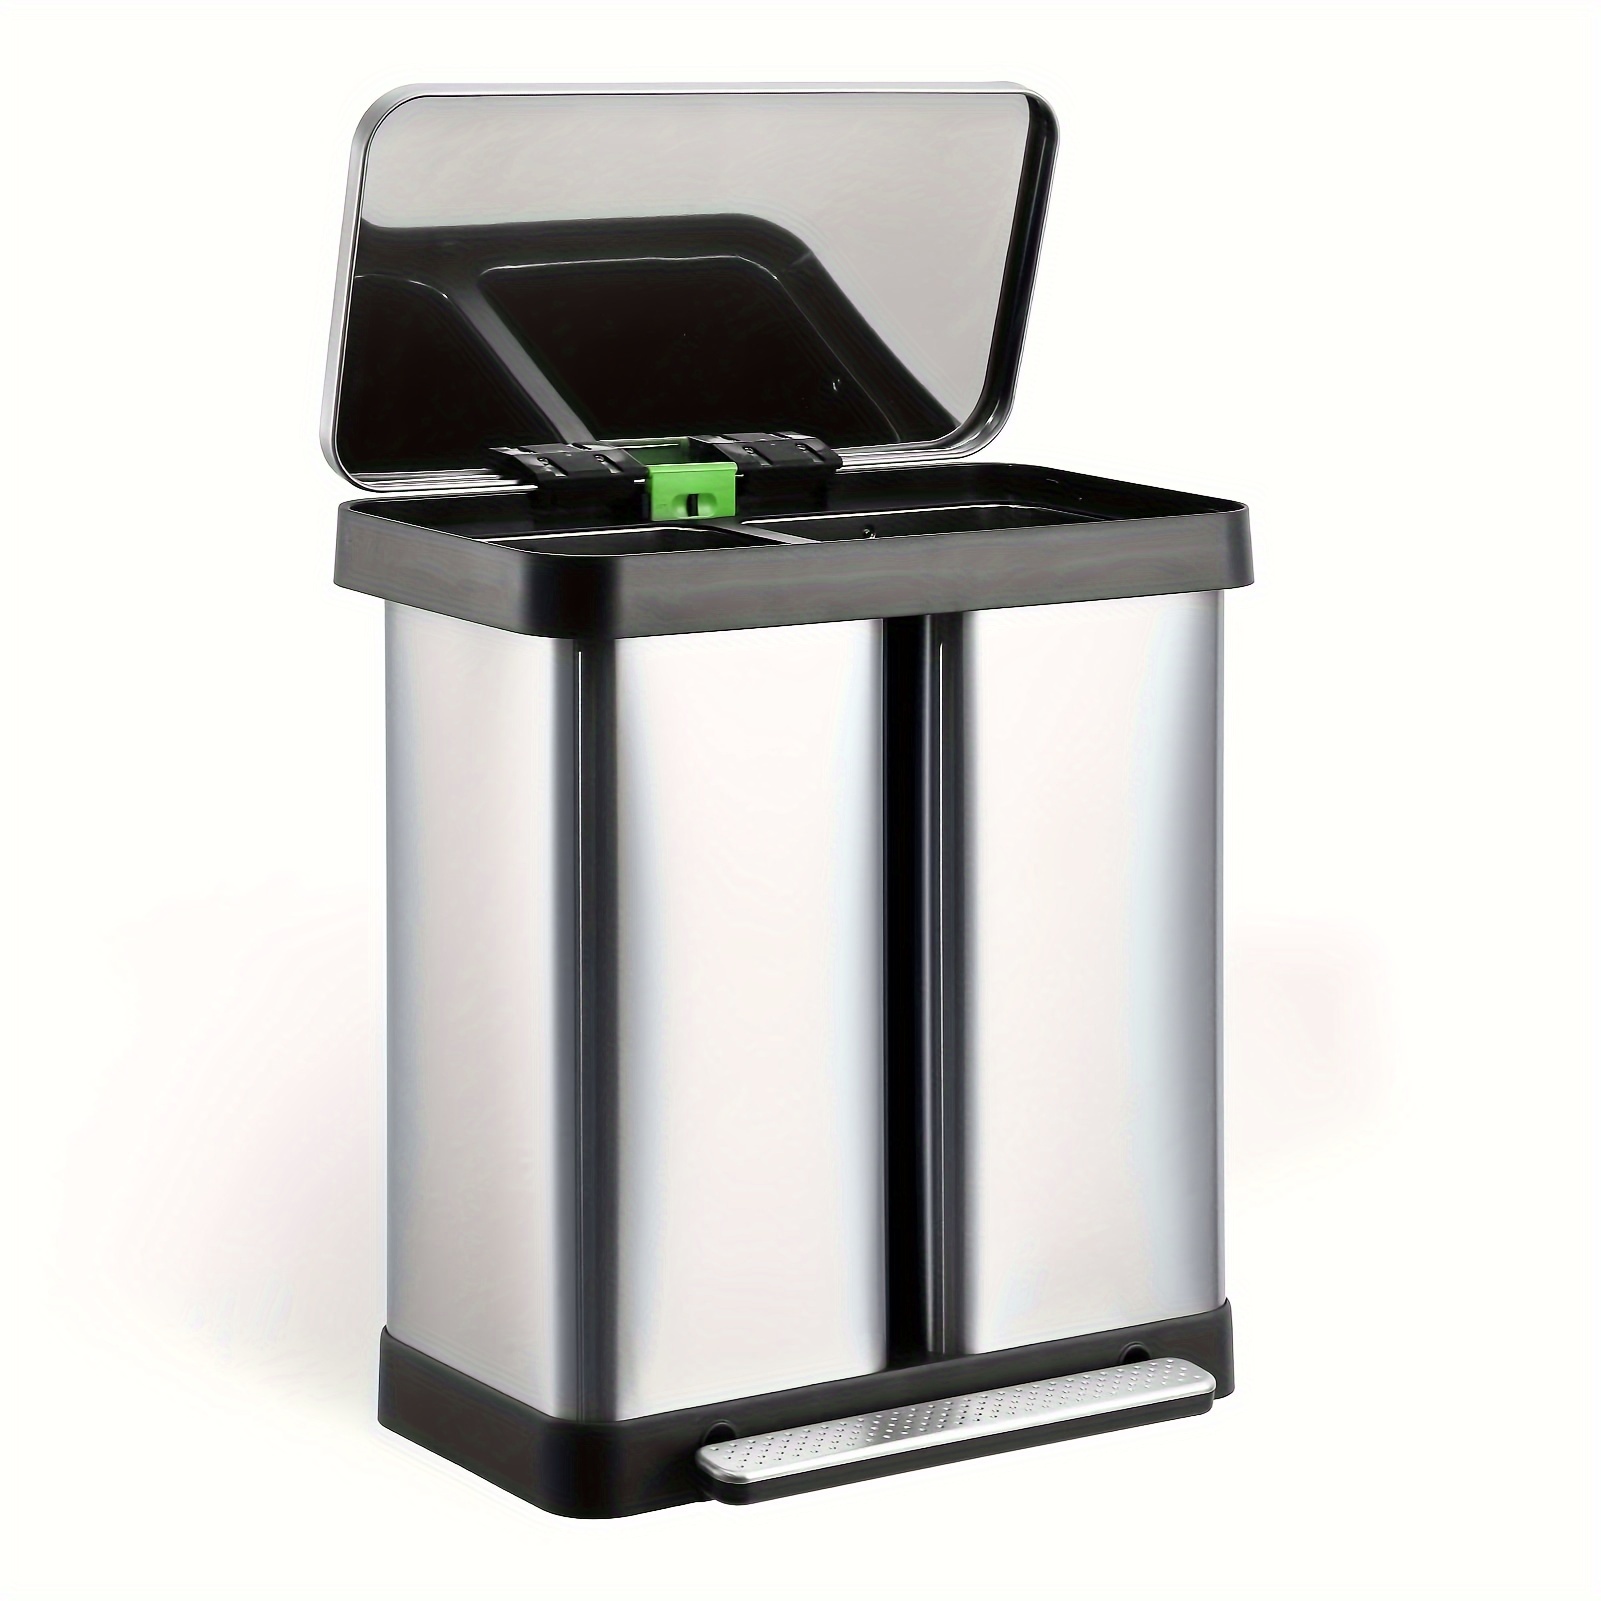 

Dual Trash Can, Stainless Steel 2 X 9.5 Gal (2 X 36l) Garbage Can, Steel Pedal Recycle Bin With Lid, Rectangular Hands-free Kitchen Trash Can